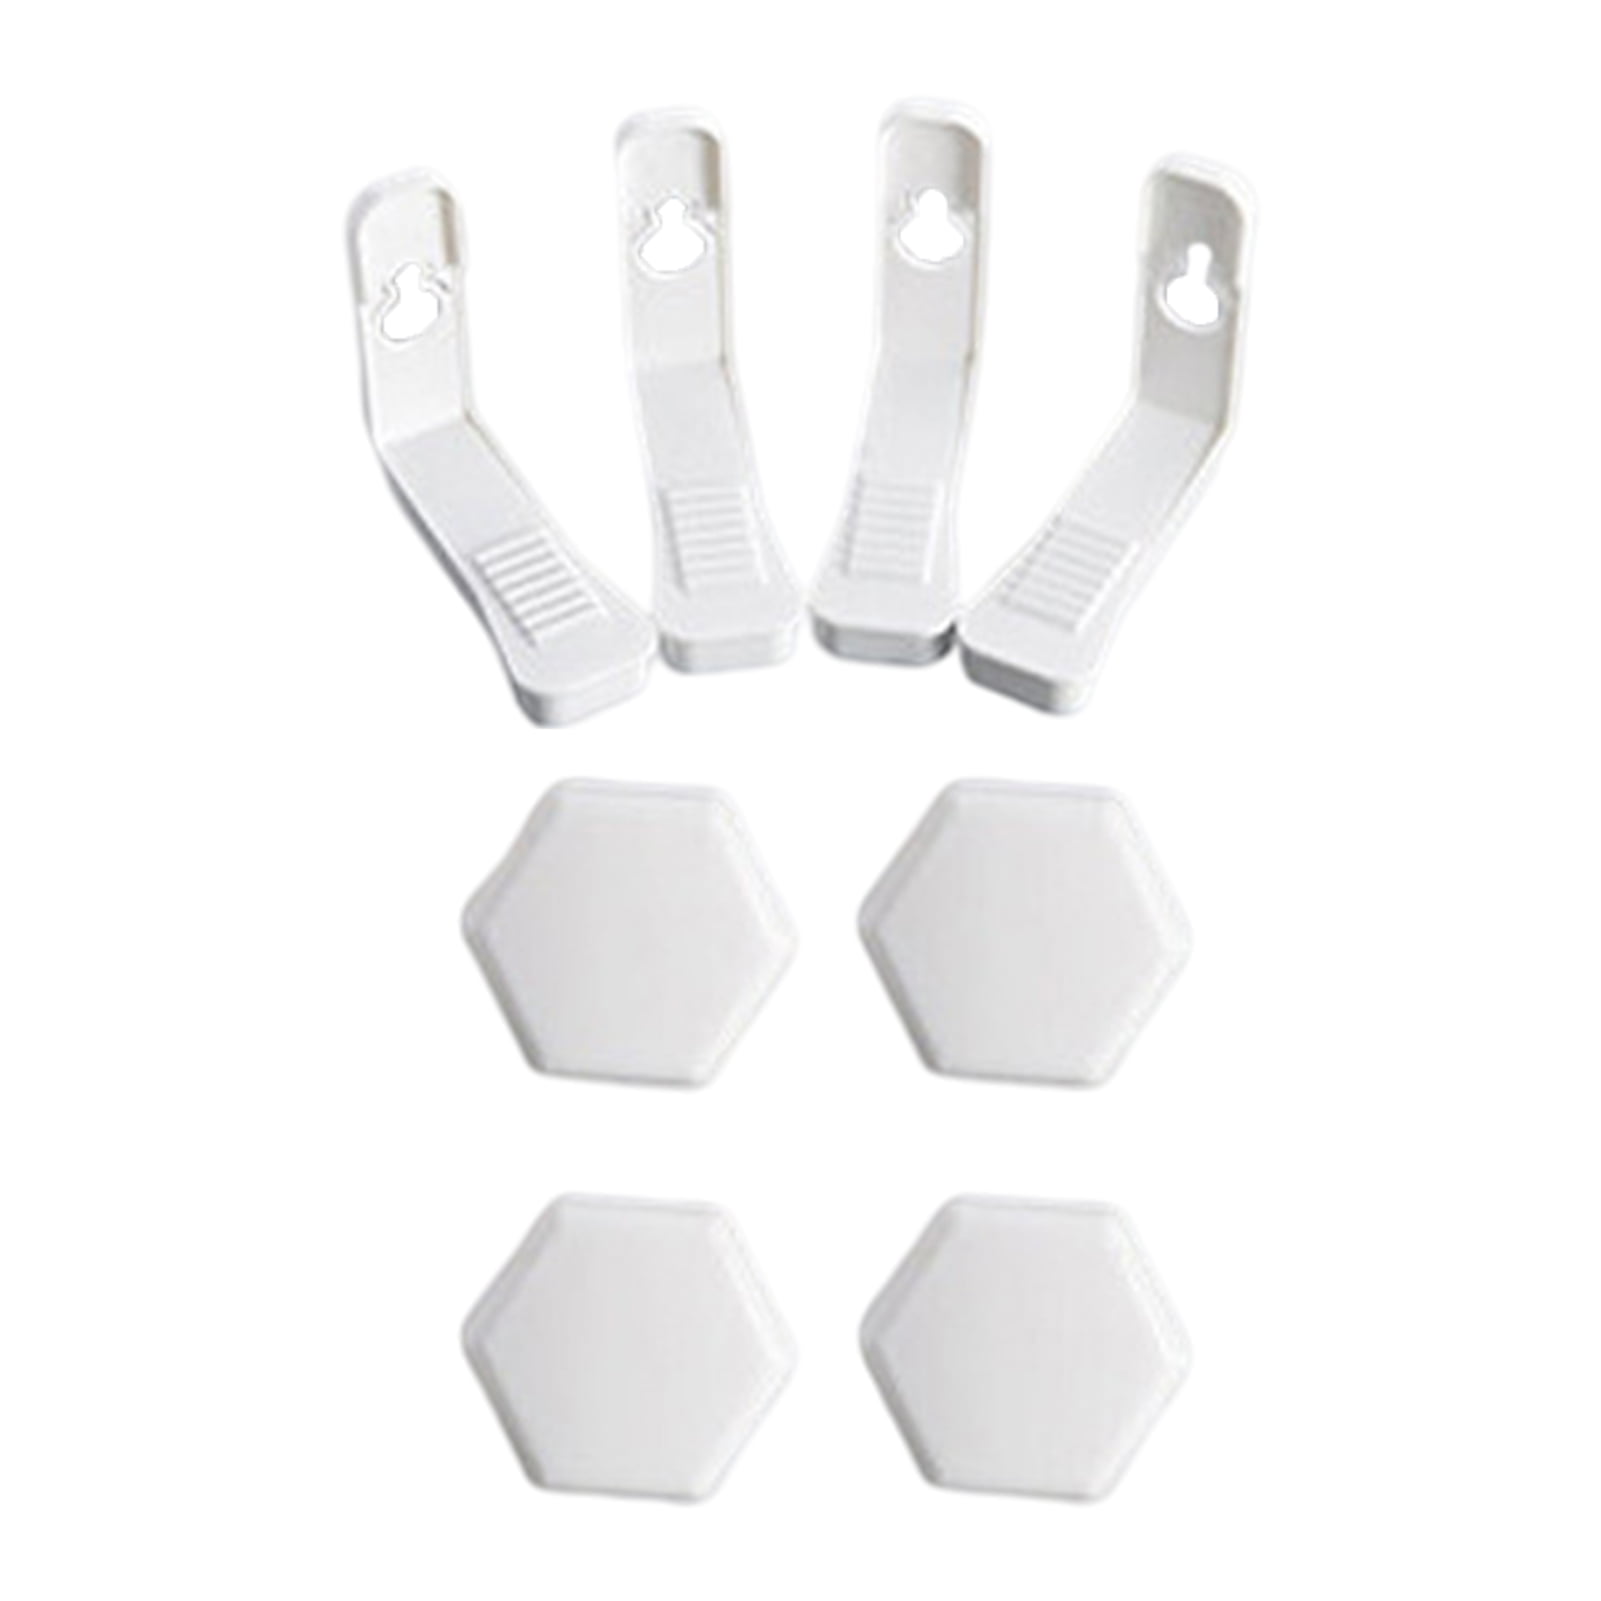 Bed Sheet Grippers Clip Set - Best Sellers Club